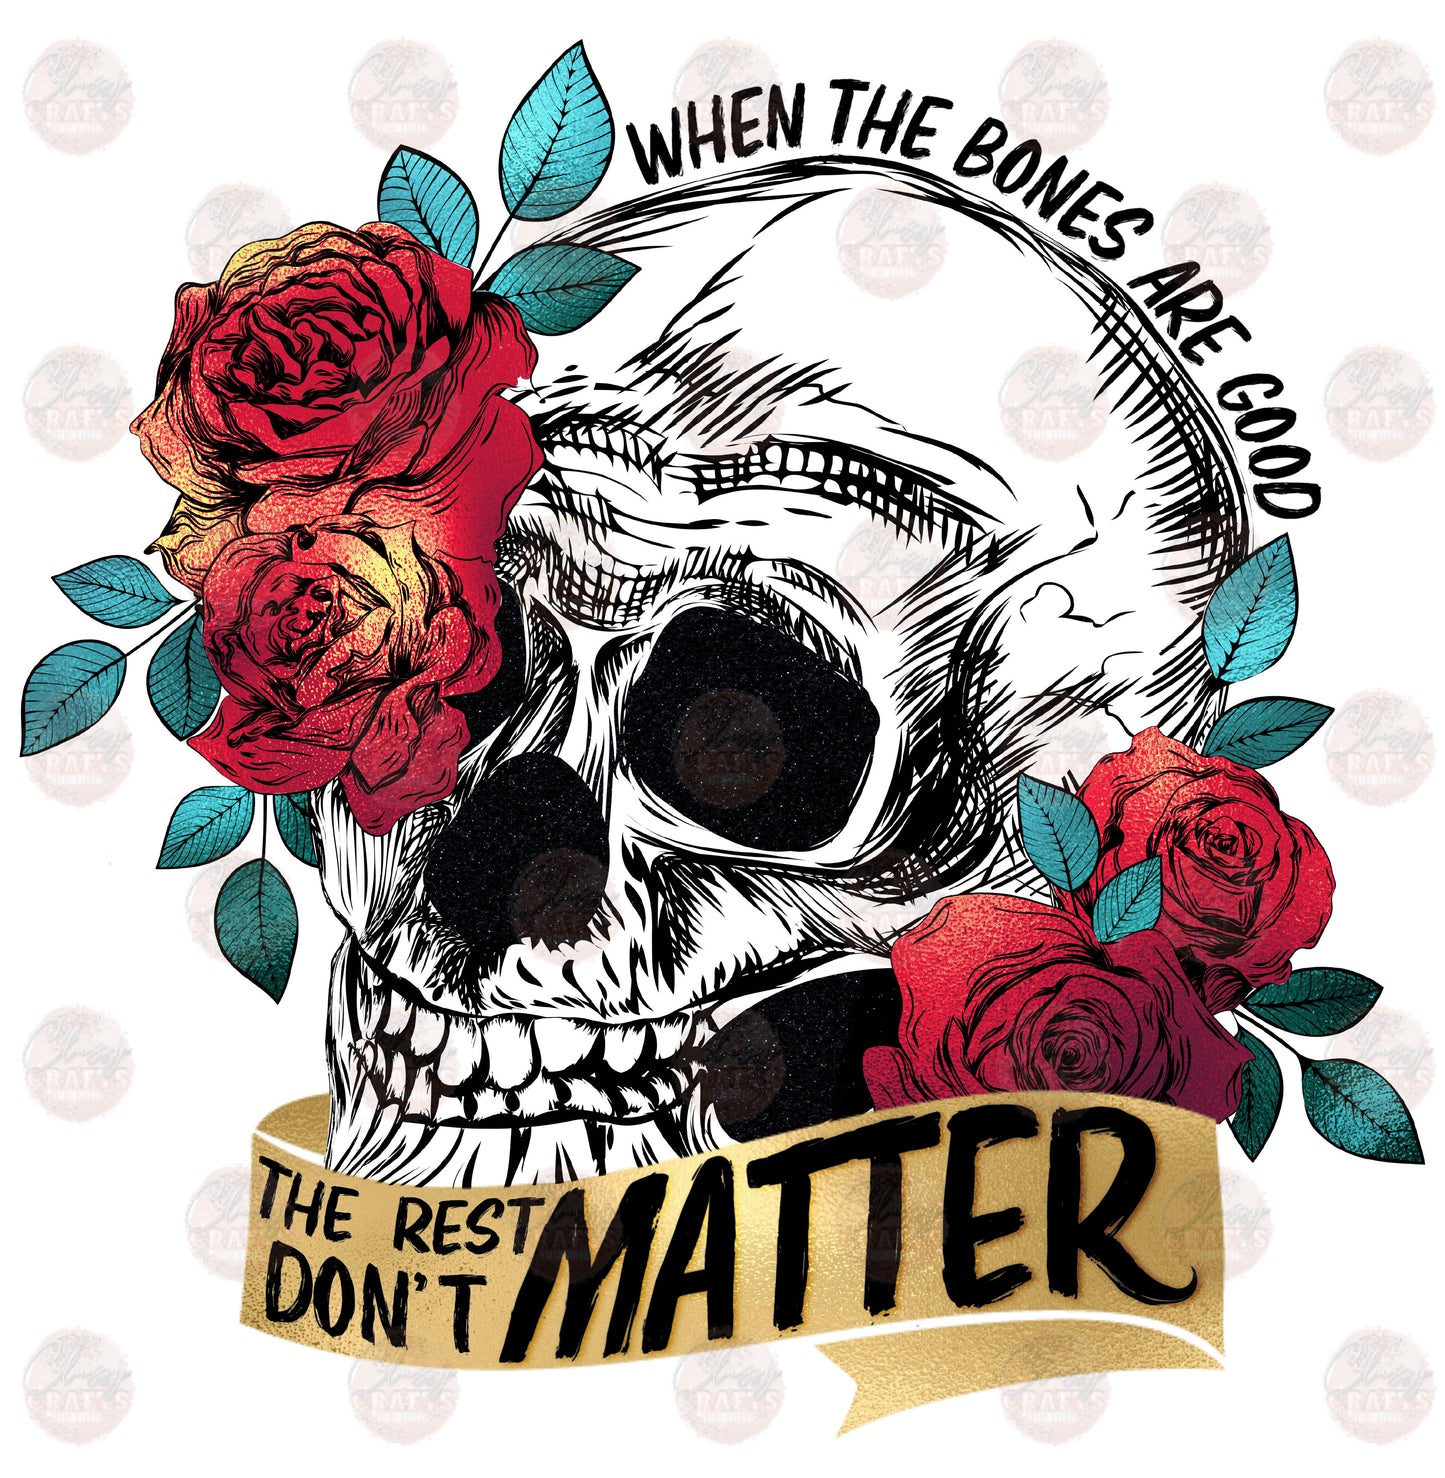 When The Bones Are Good /Gold Ribbon Red Roses - Sublimation Transfer